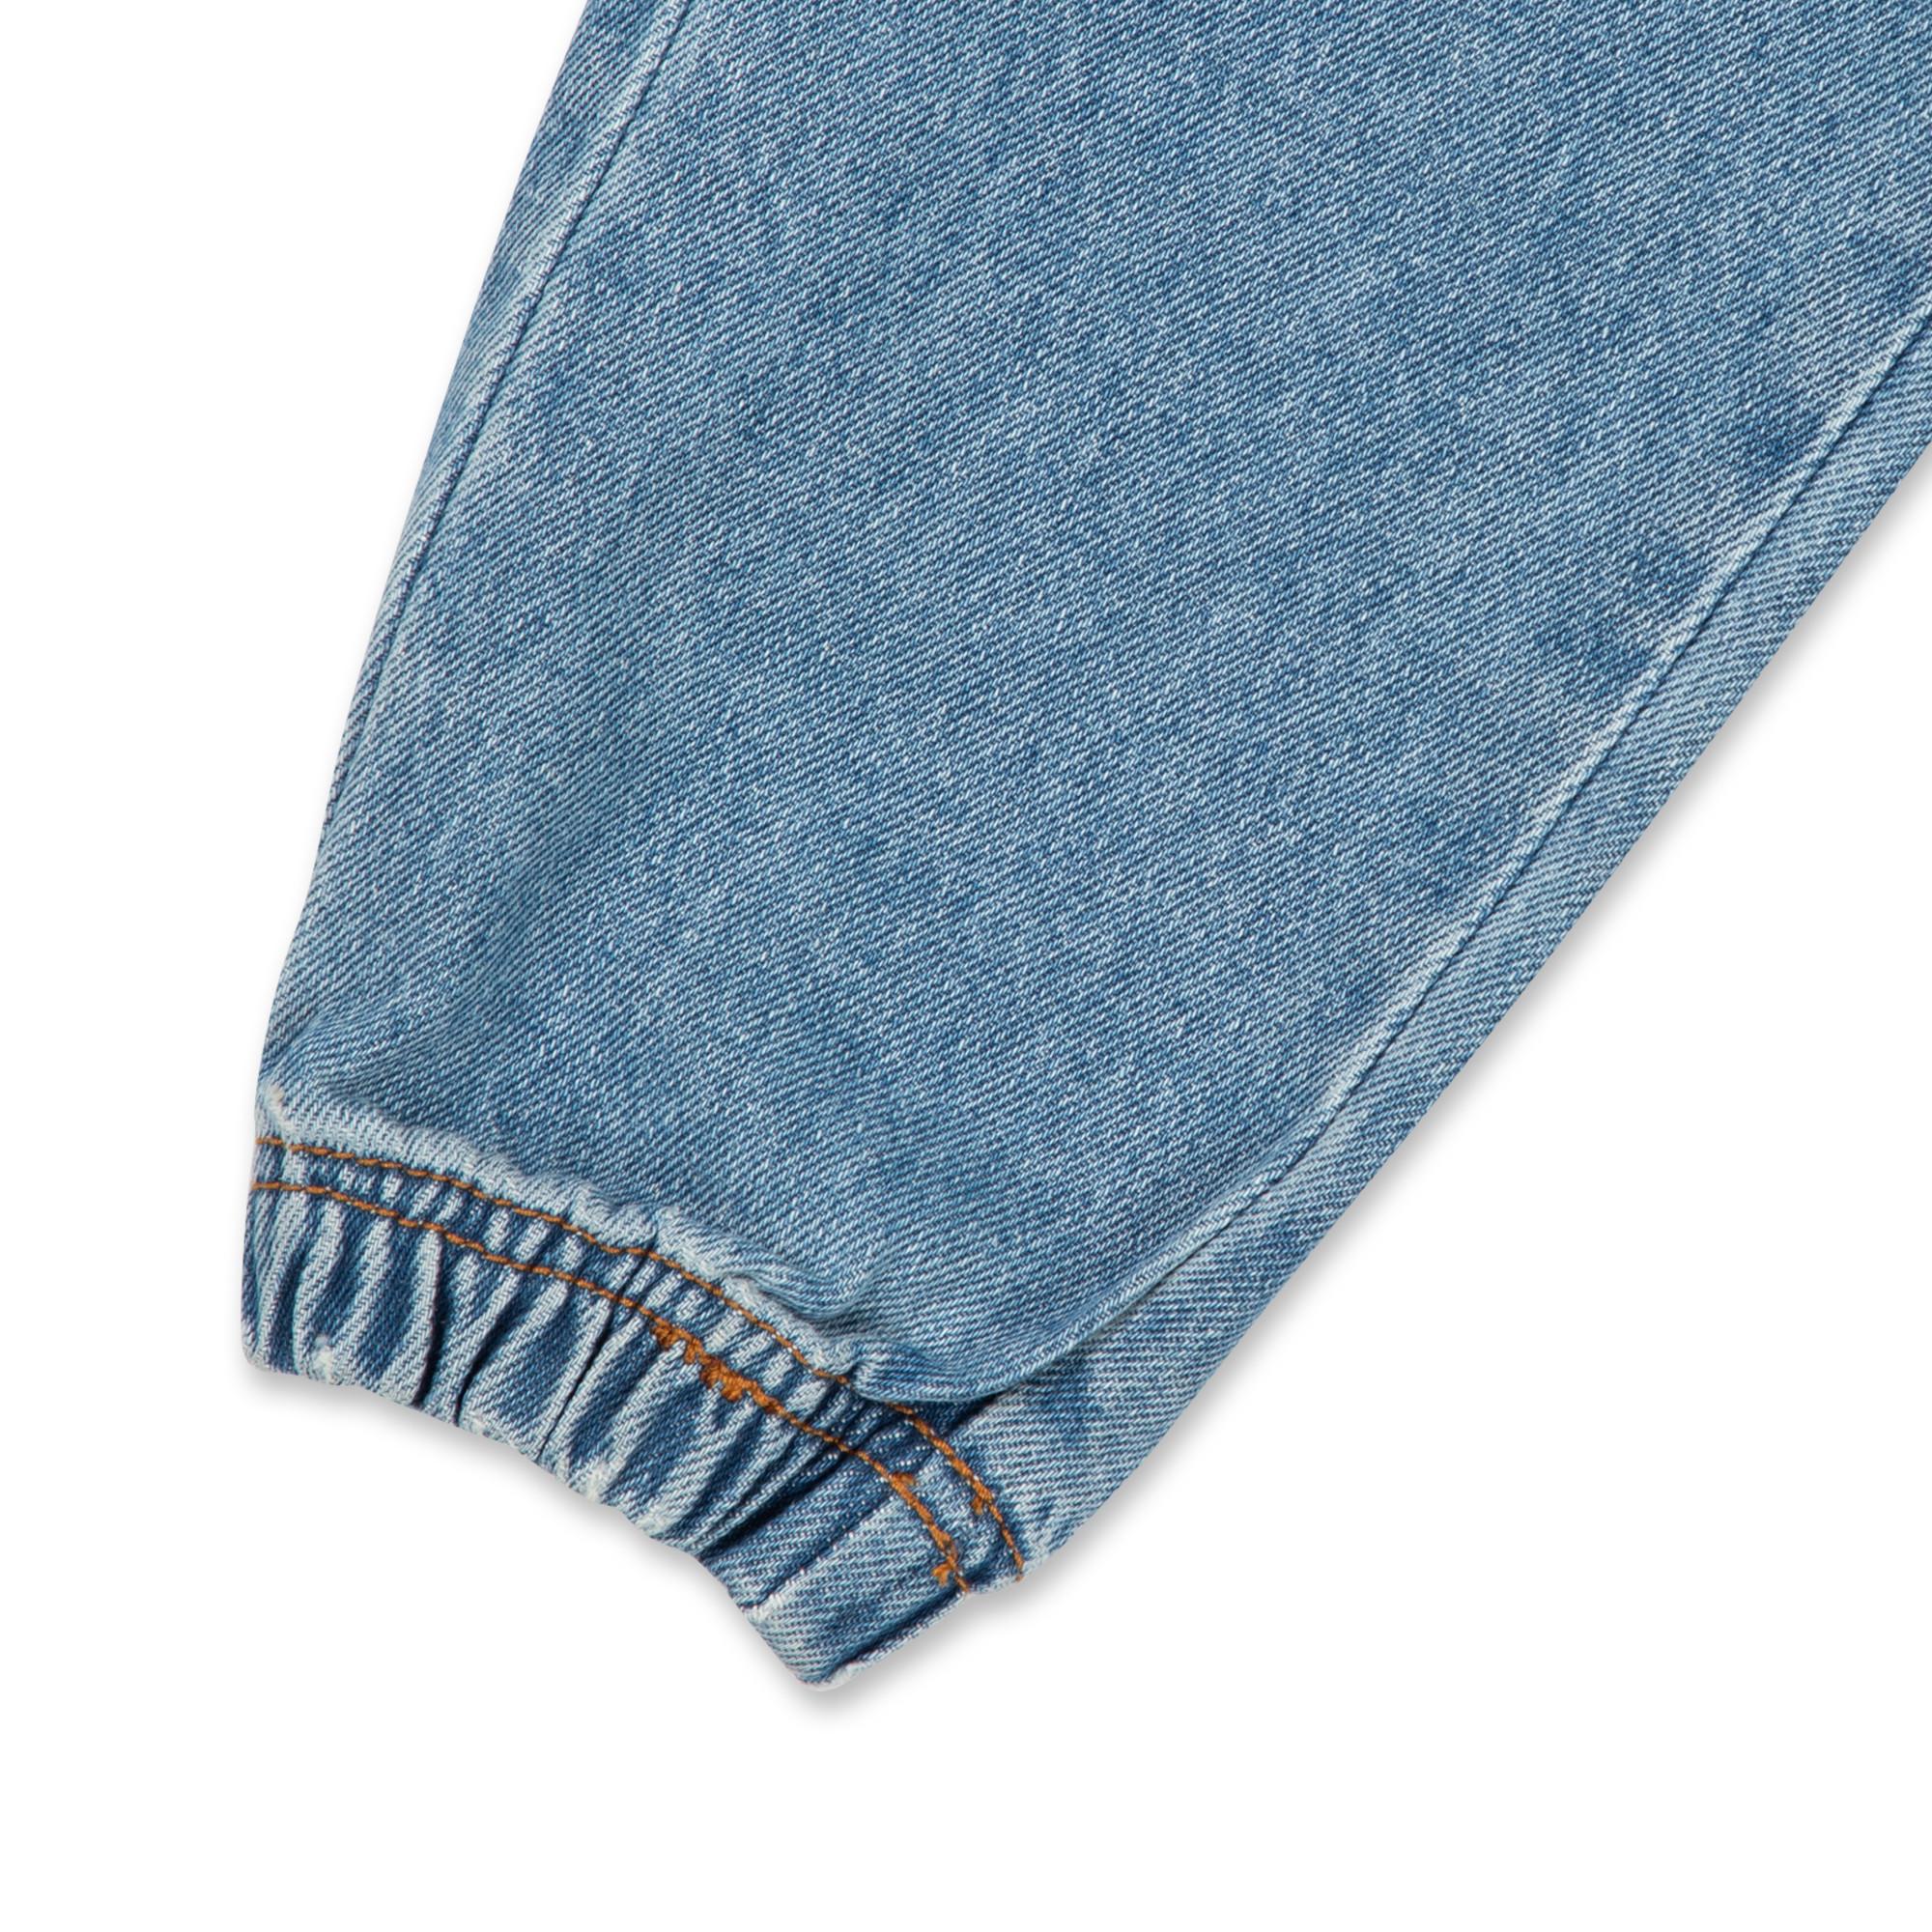 Manor Baby  Jeans 